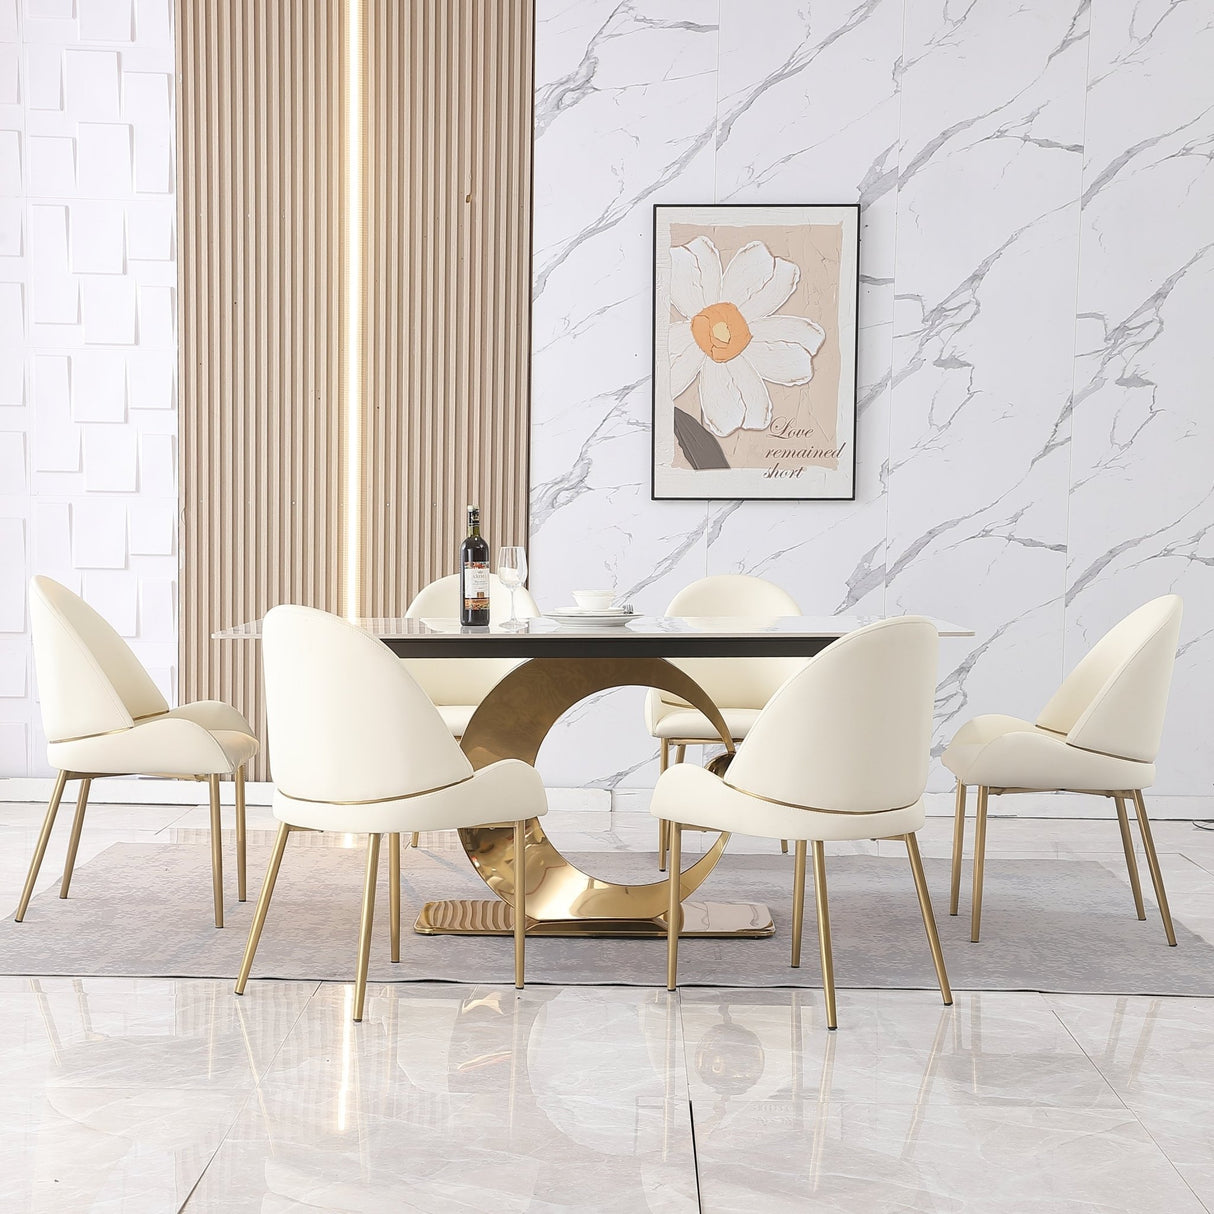 71-Inch Stone DiningTable with Carrara White color and Round special shape stainless steel Gold Pedestal Base - Home Elegance USA